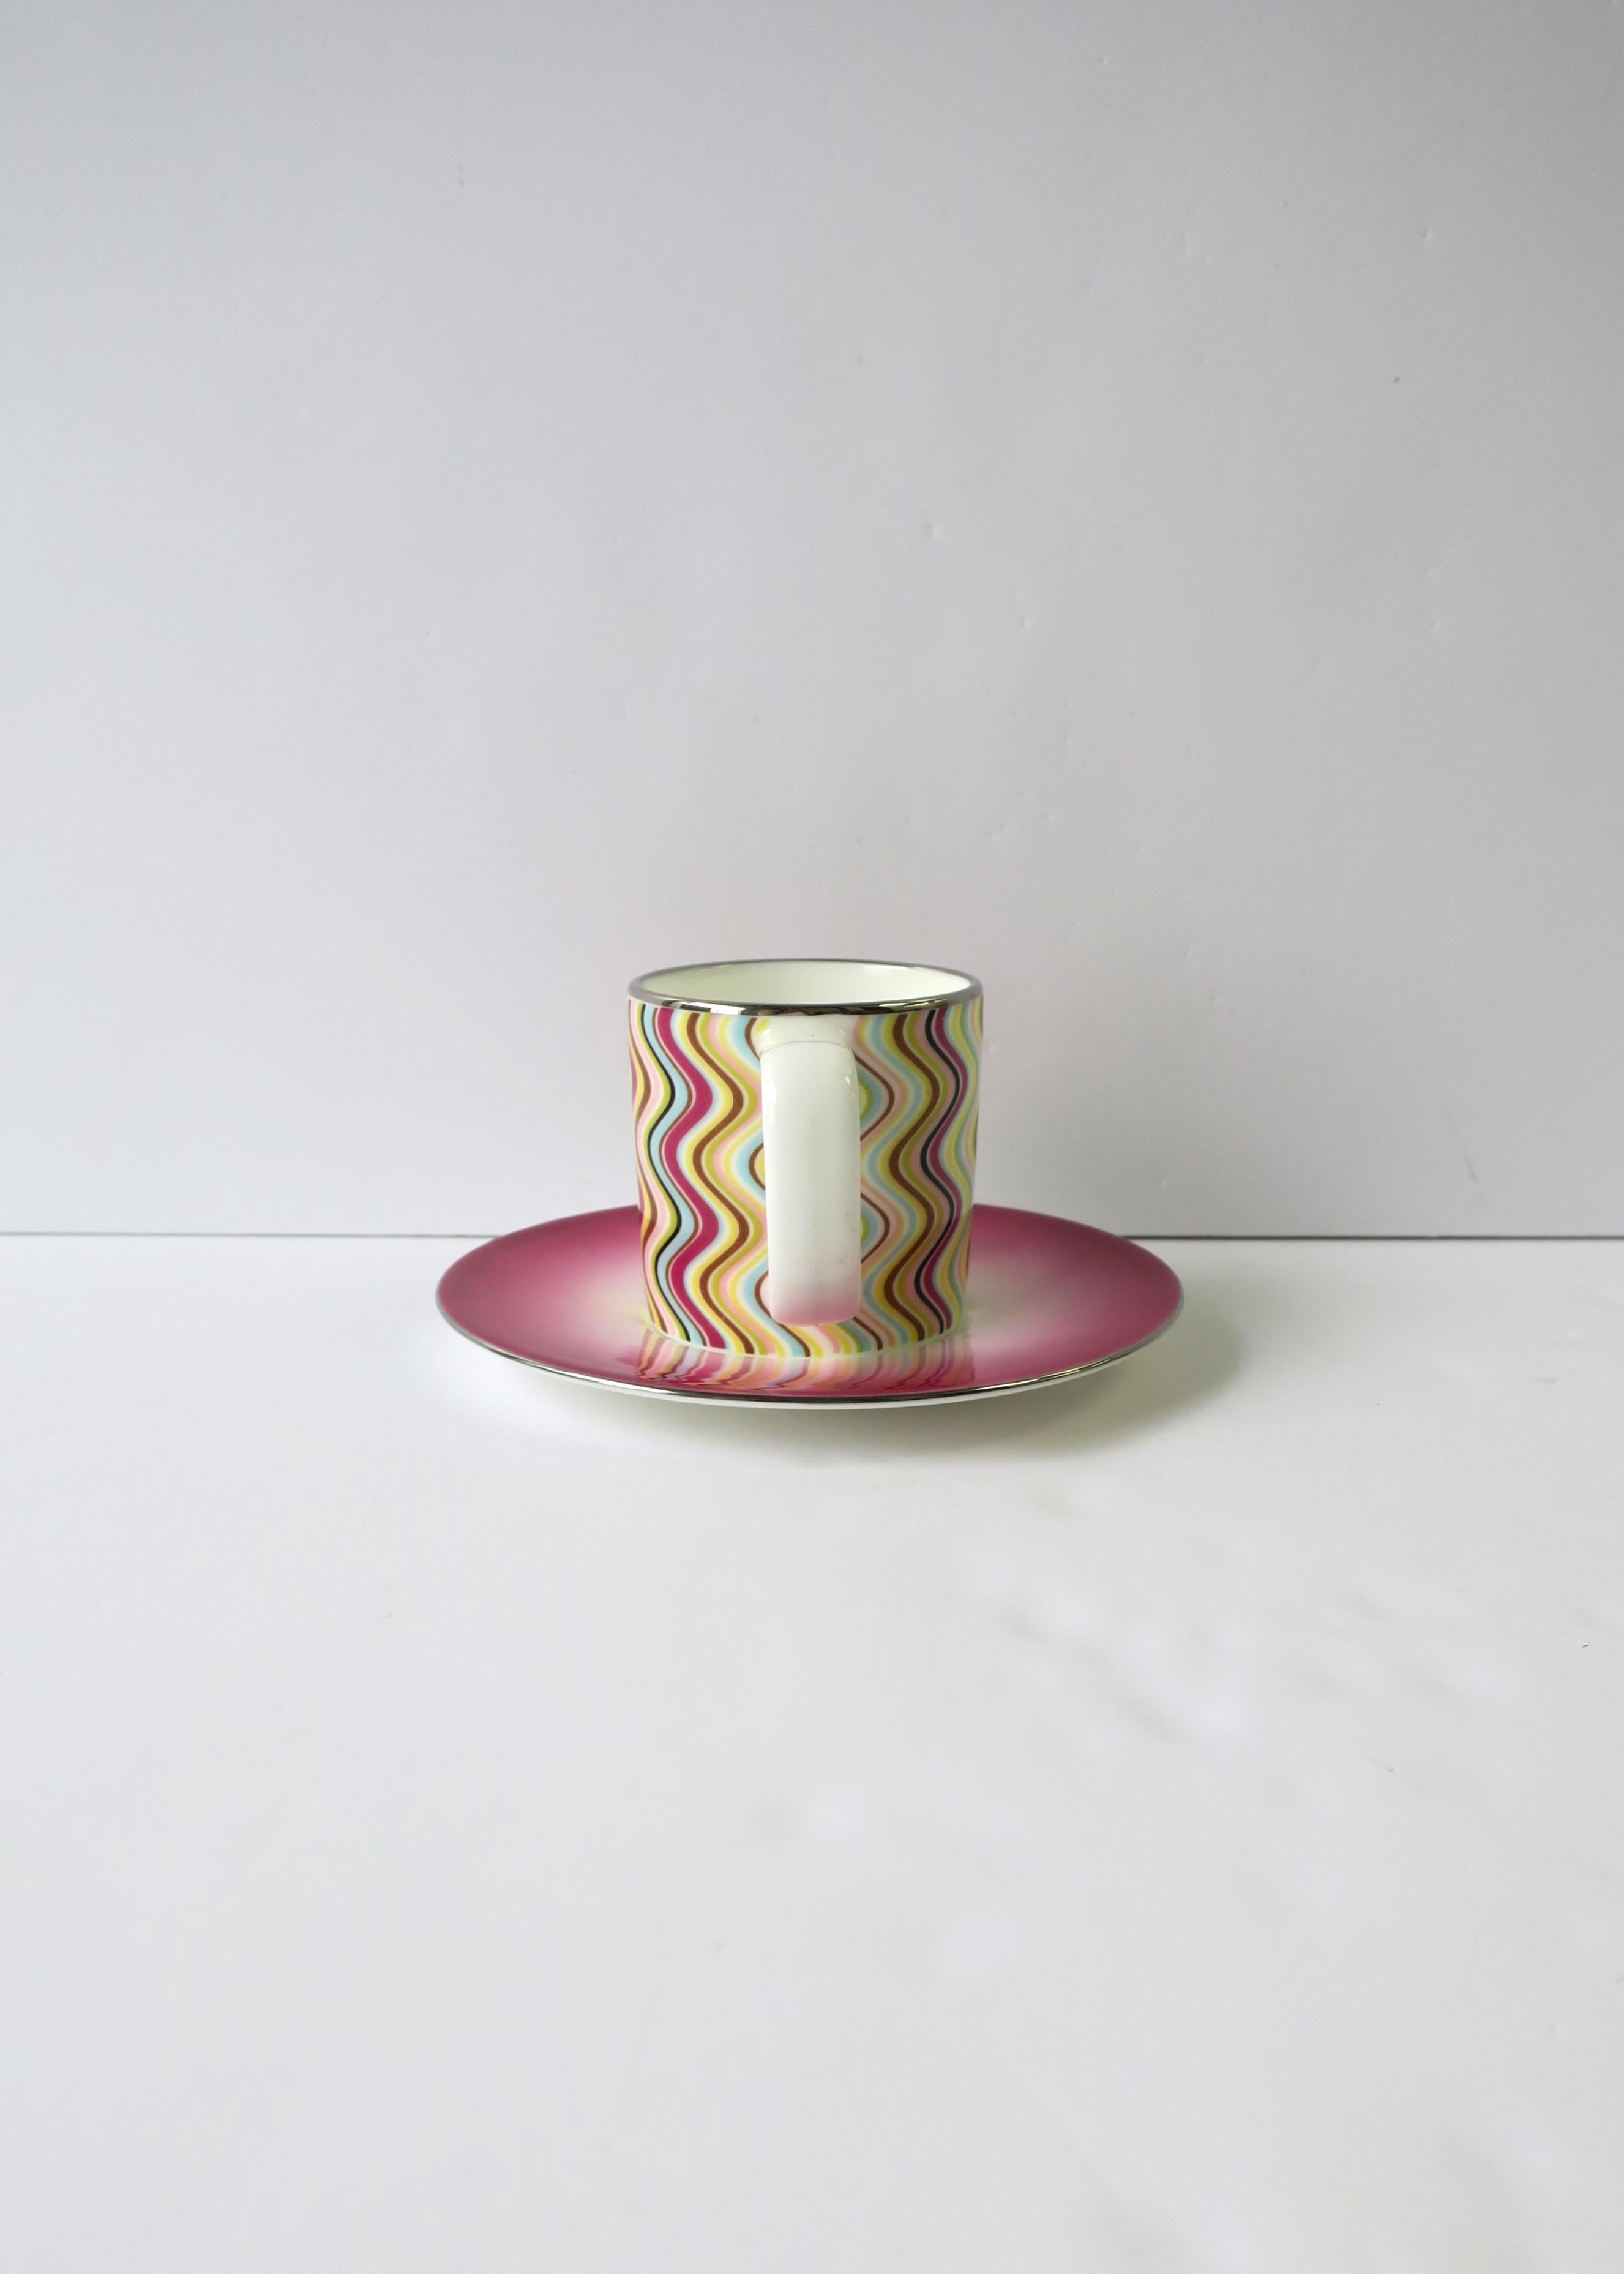 Glazed Missoni Italian Porcelain Coffee Espresso Cup and Saucer For Sale